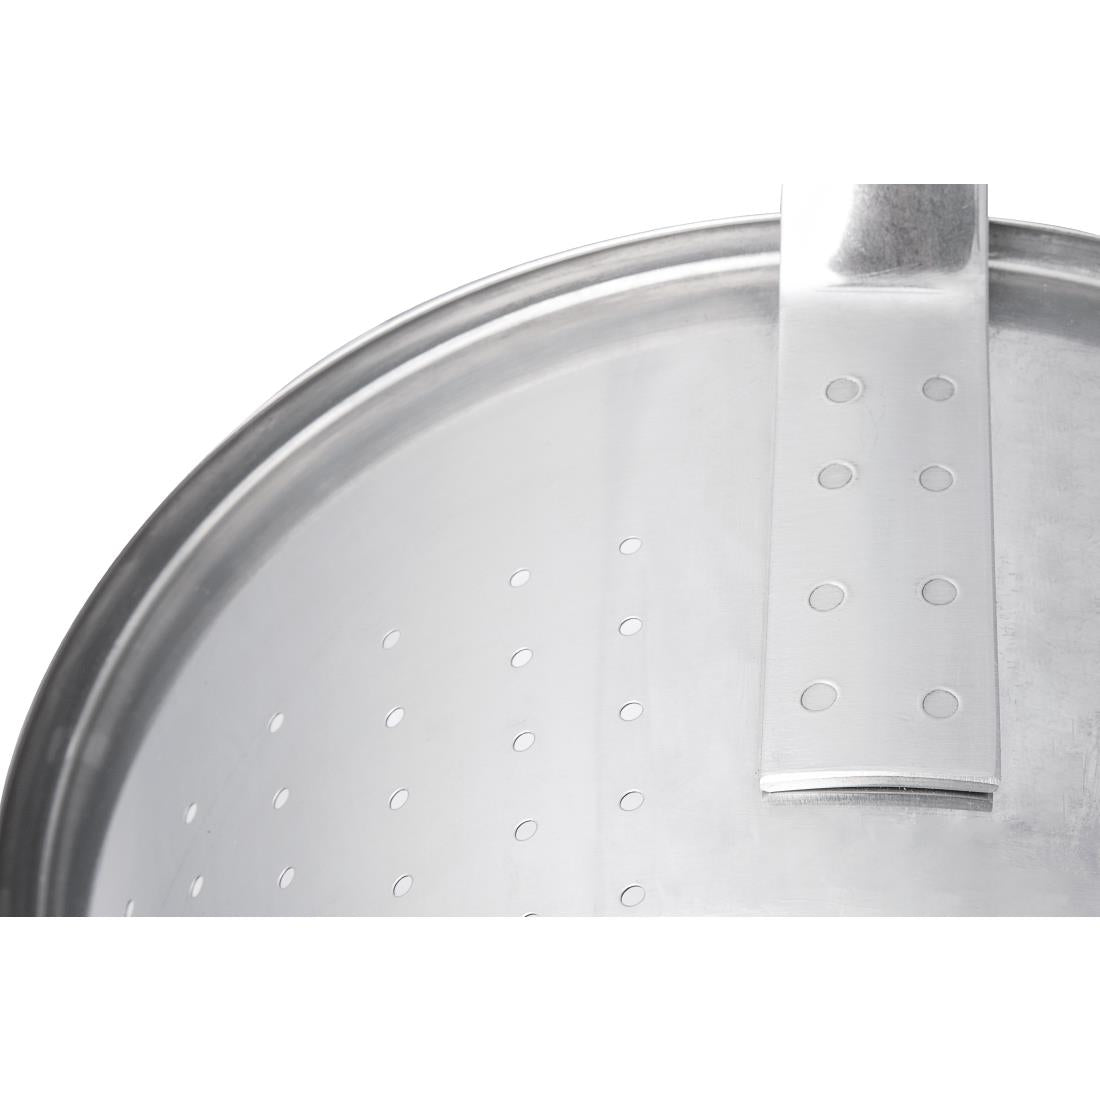 CY493 DeBuyer Stainless Steel Conical Colander With Hook 28cm JD Catering Equipment Solutions Ltd